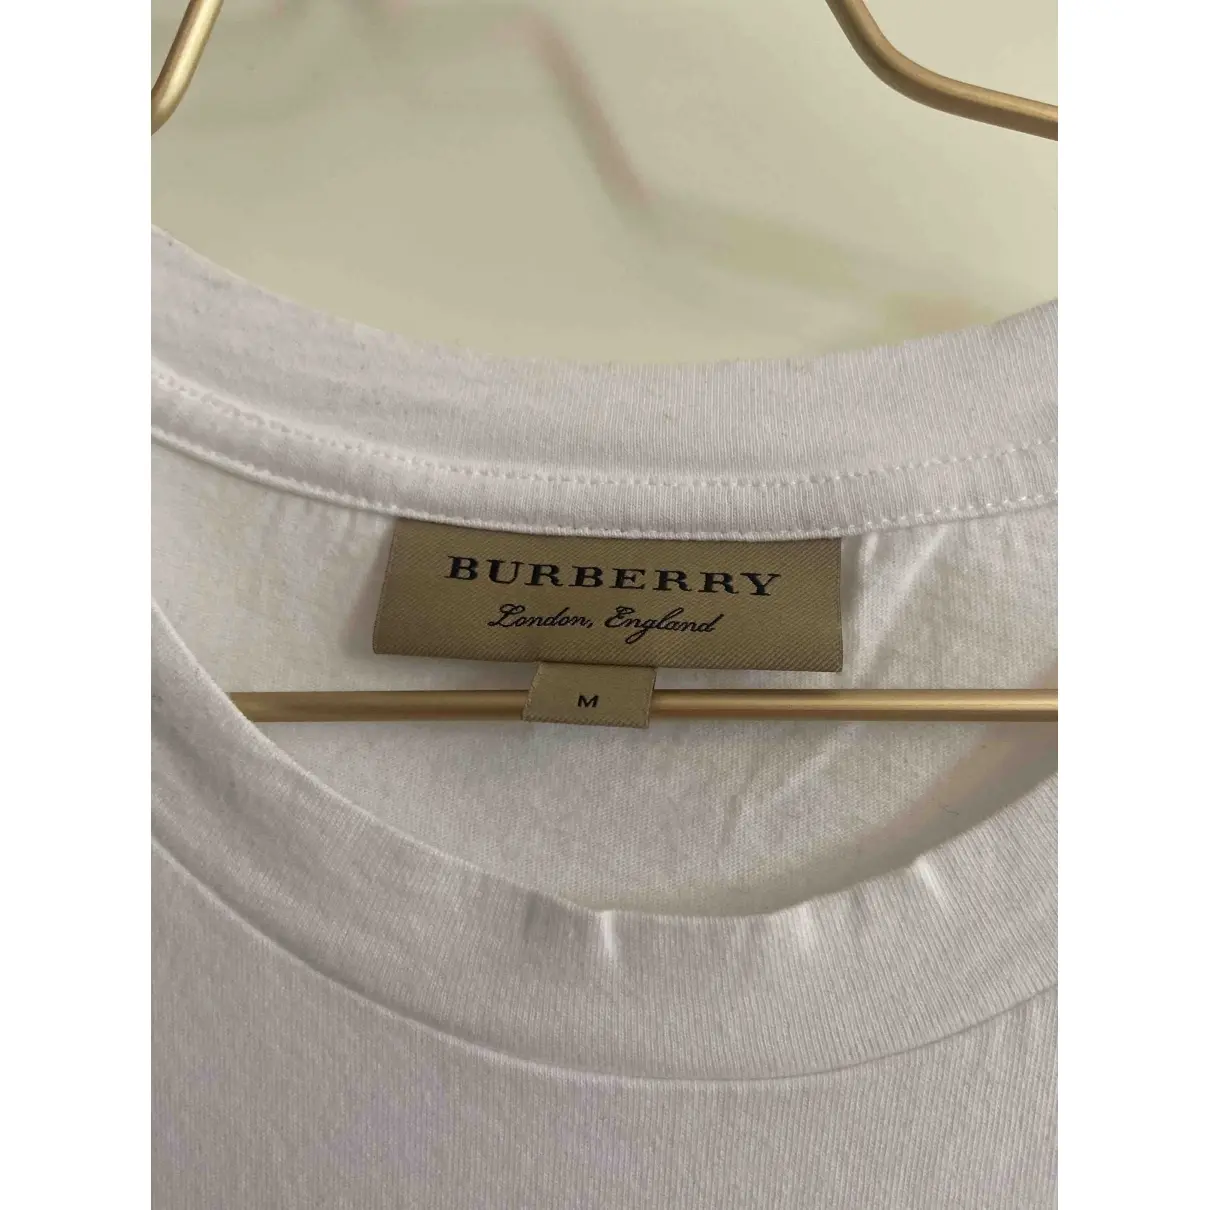 Buy Burberry White Cotton Top online